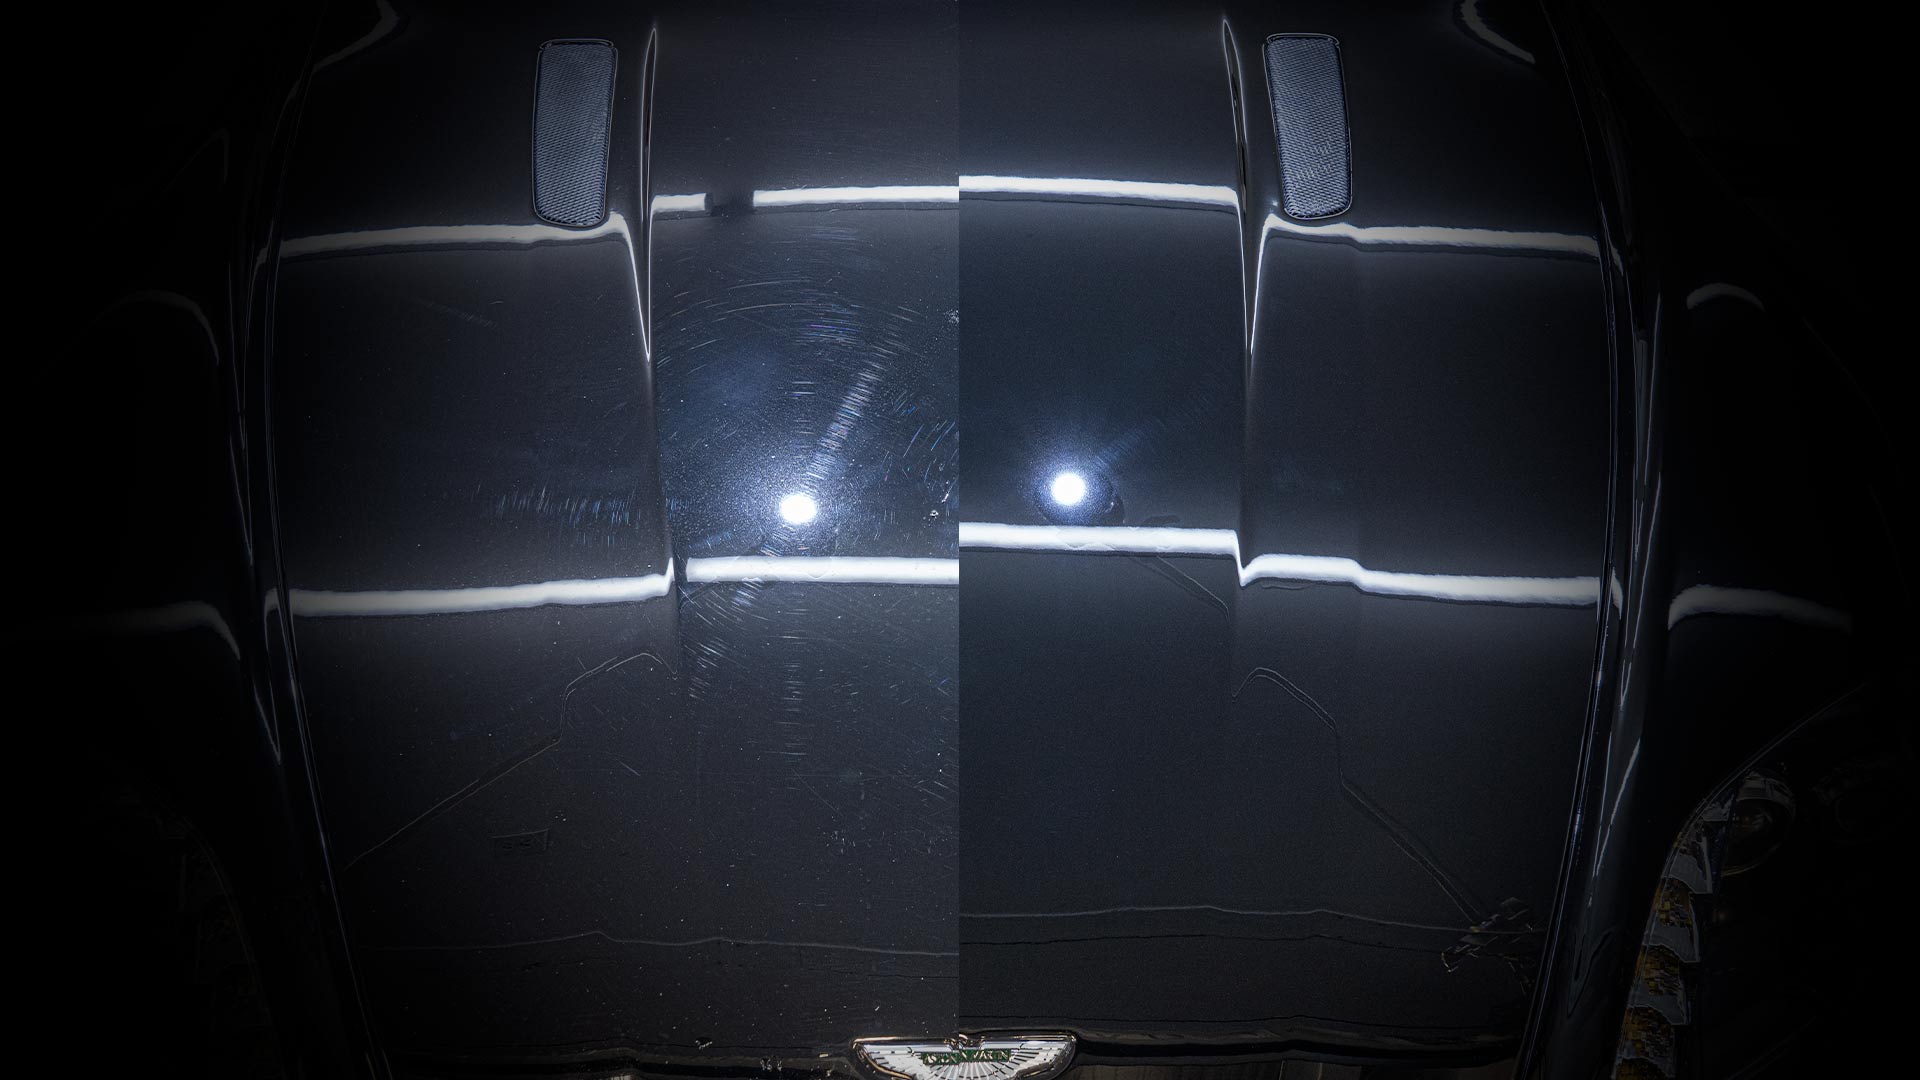 Just got a stage 1 paint correction and ceramic coat, should I have  expected better? : r/Detailing